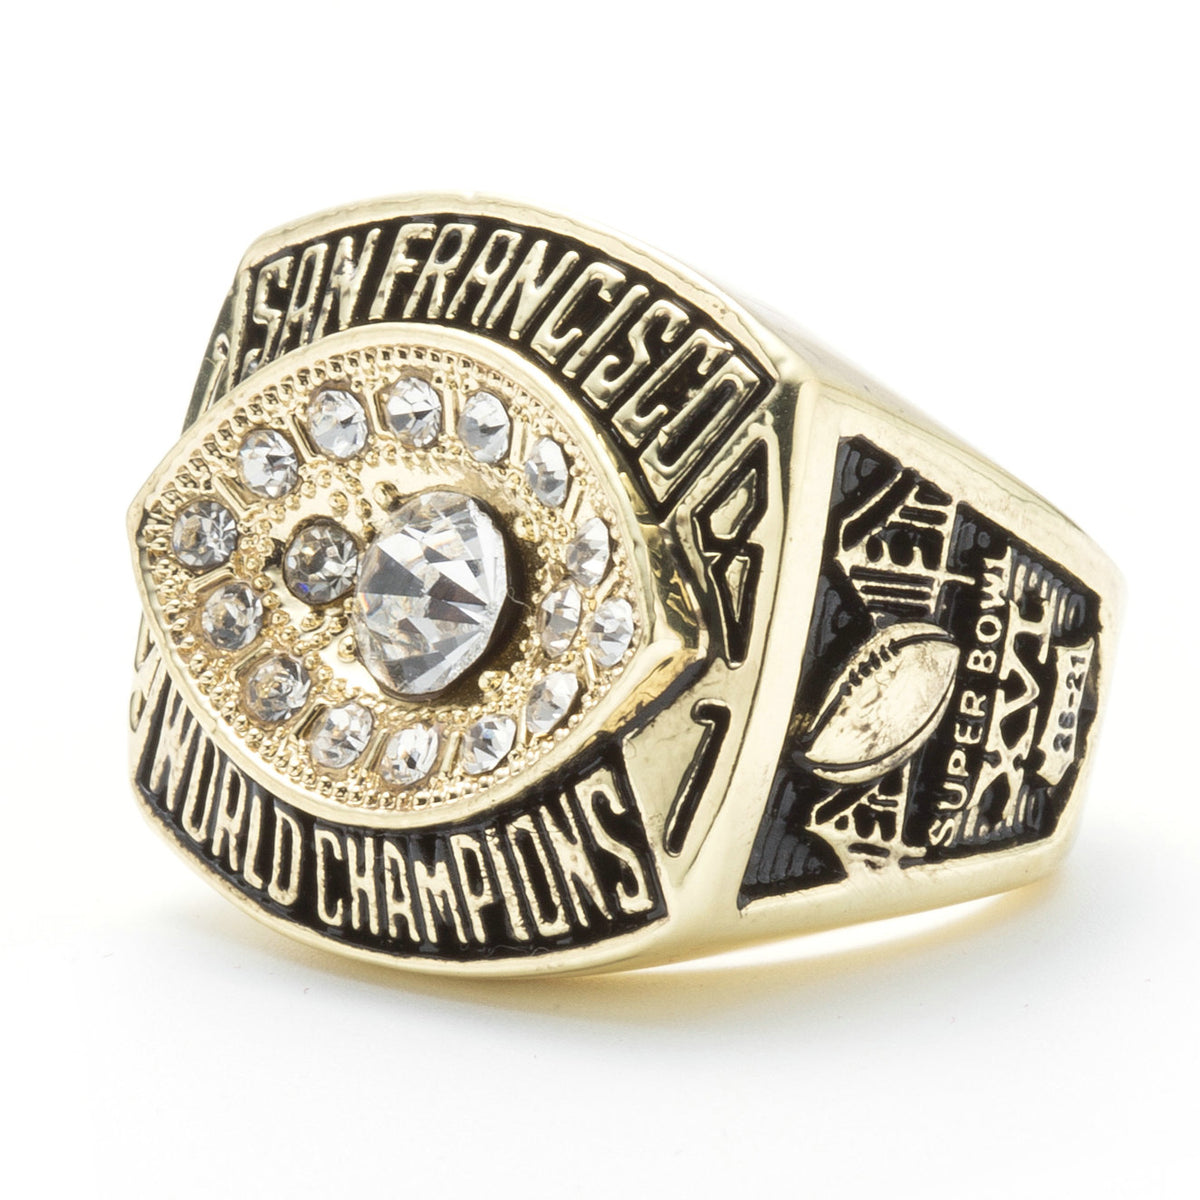 all 49ers super bowl rings